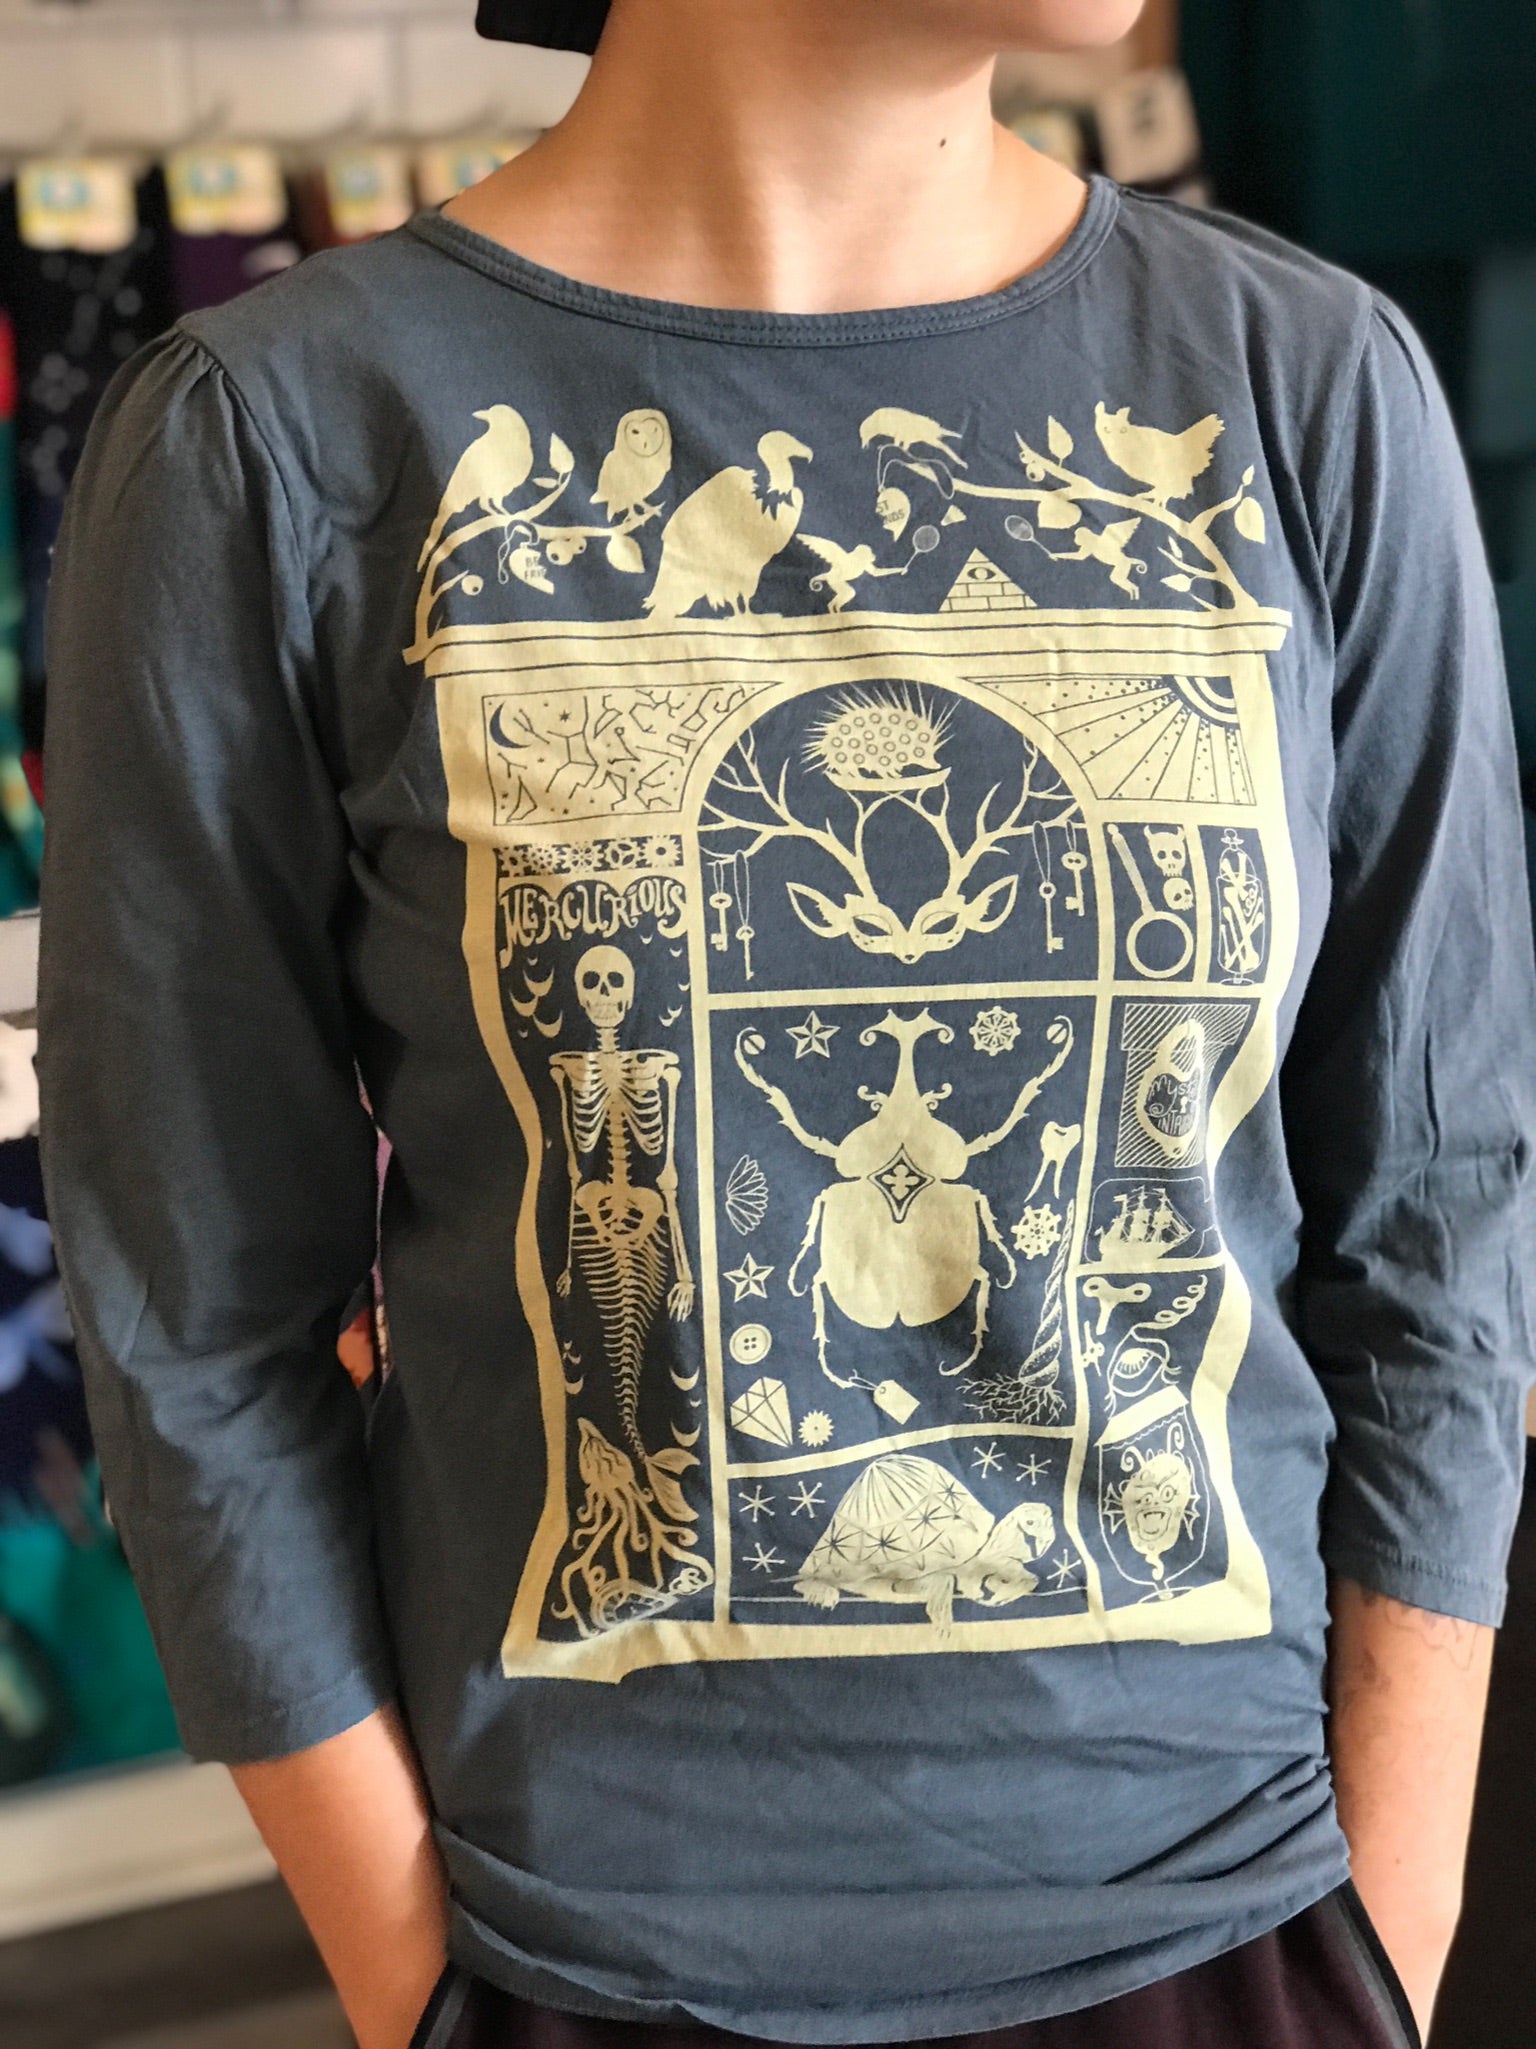 Shirt: Cabinet of Curiouser and Curiouser